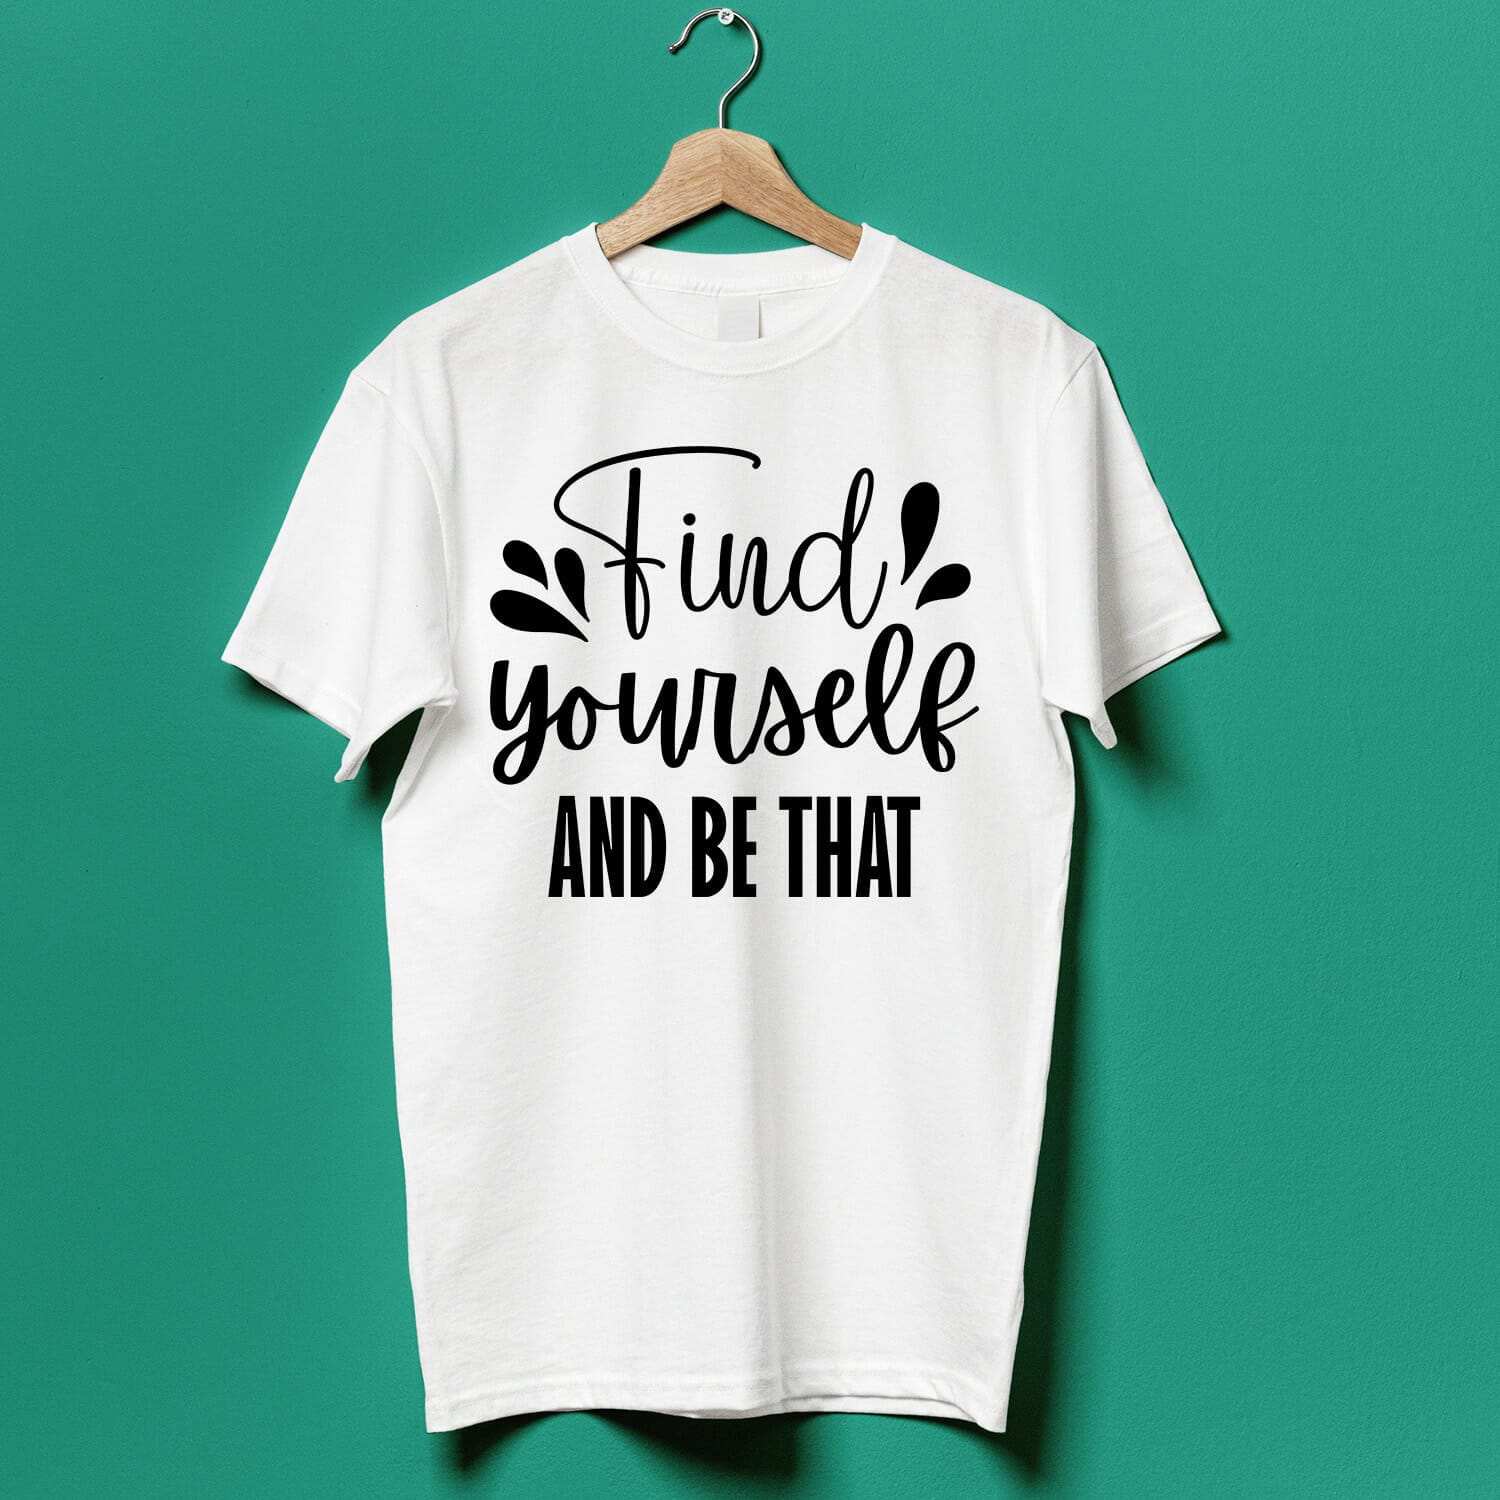 Find yourself and be that positive quote T-shirt Design